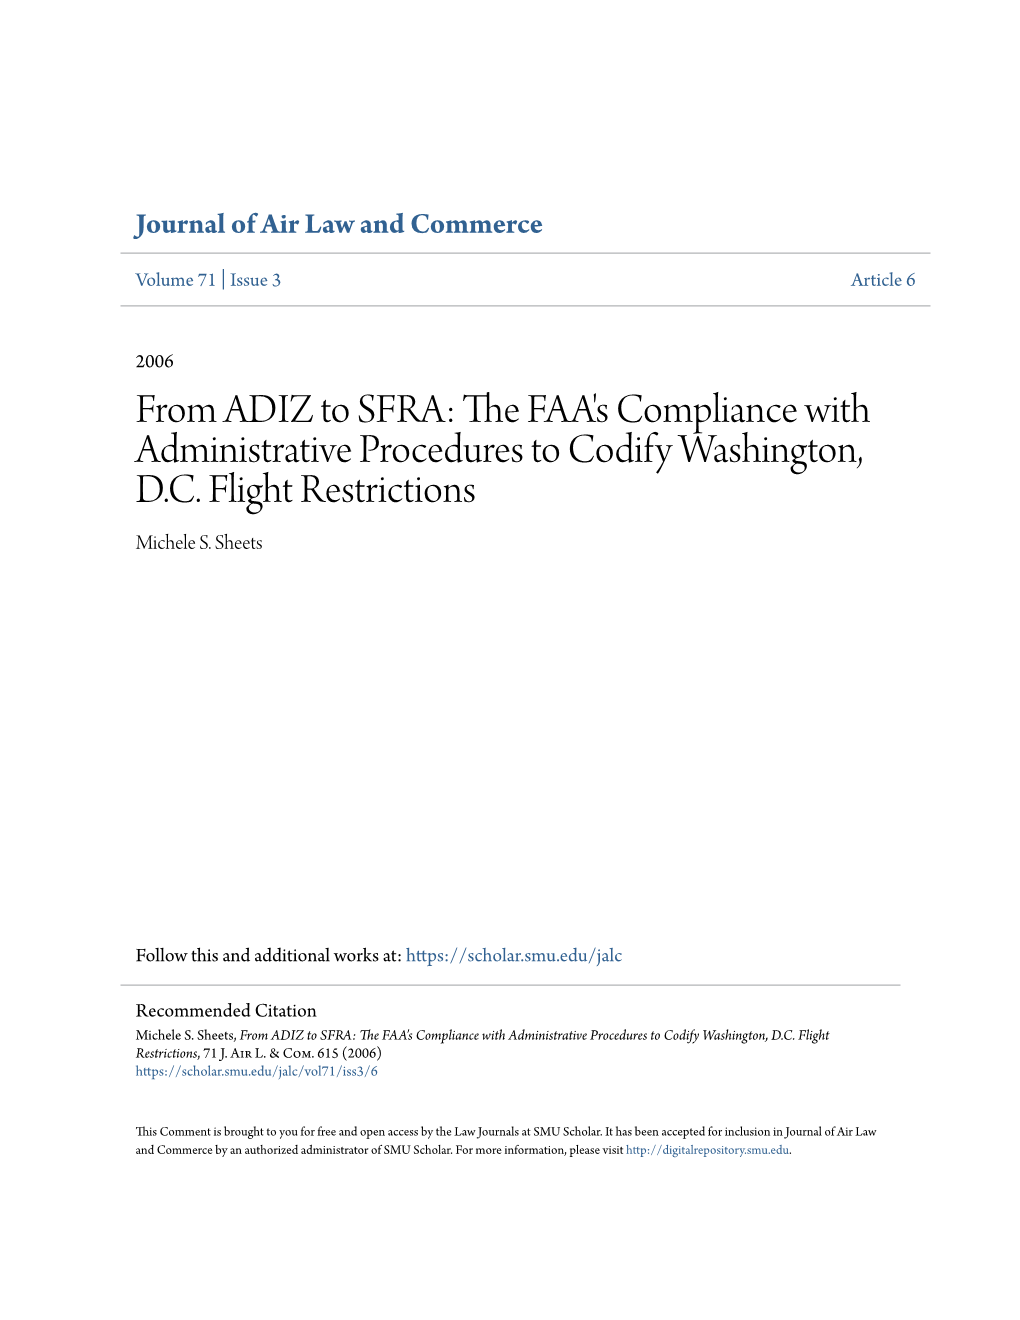 From ADIZ to SFRA: the AF A's Compliance with Administrative Procedures to Codify Washington, D.C